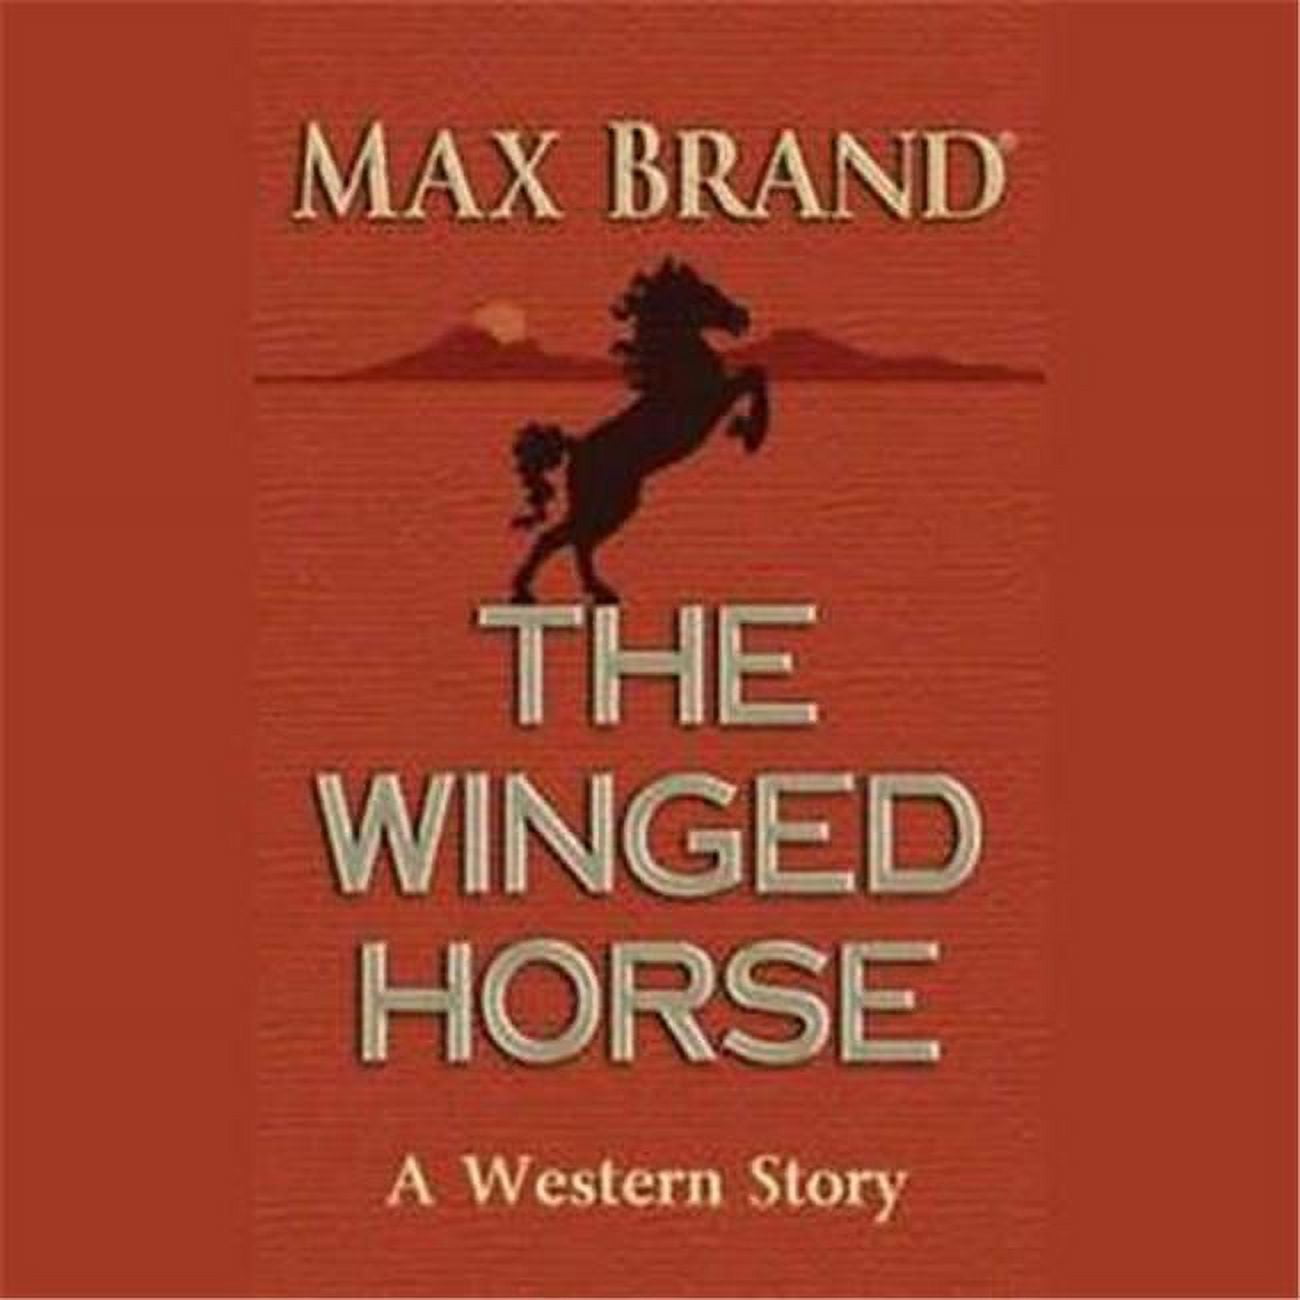 Picture of Blackstone Audio 9781504787413 The Winged Horse - Western Story Audio Book